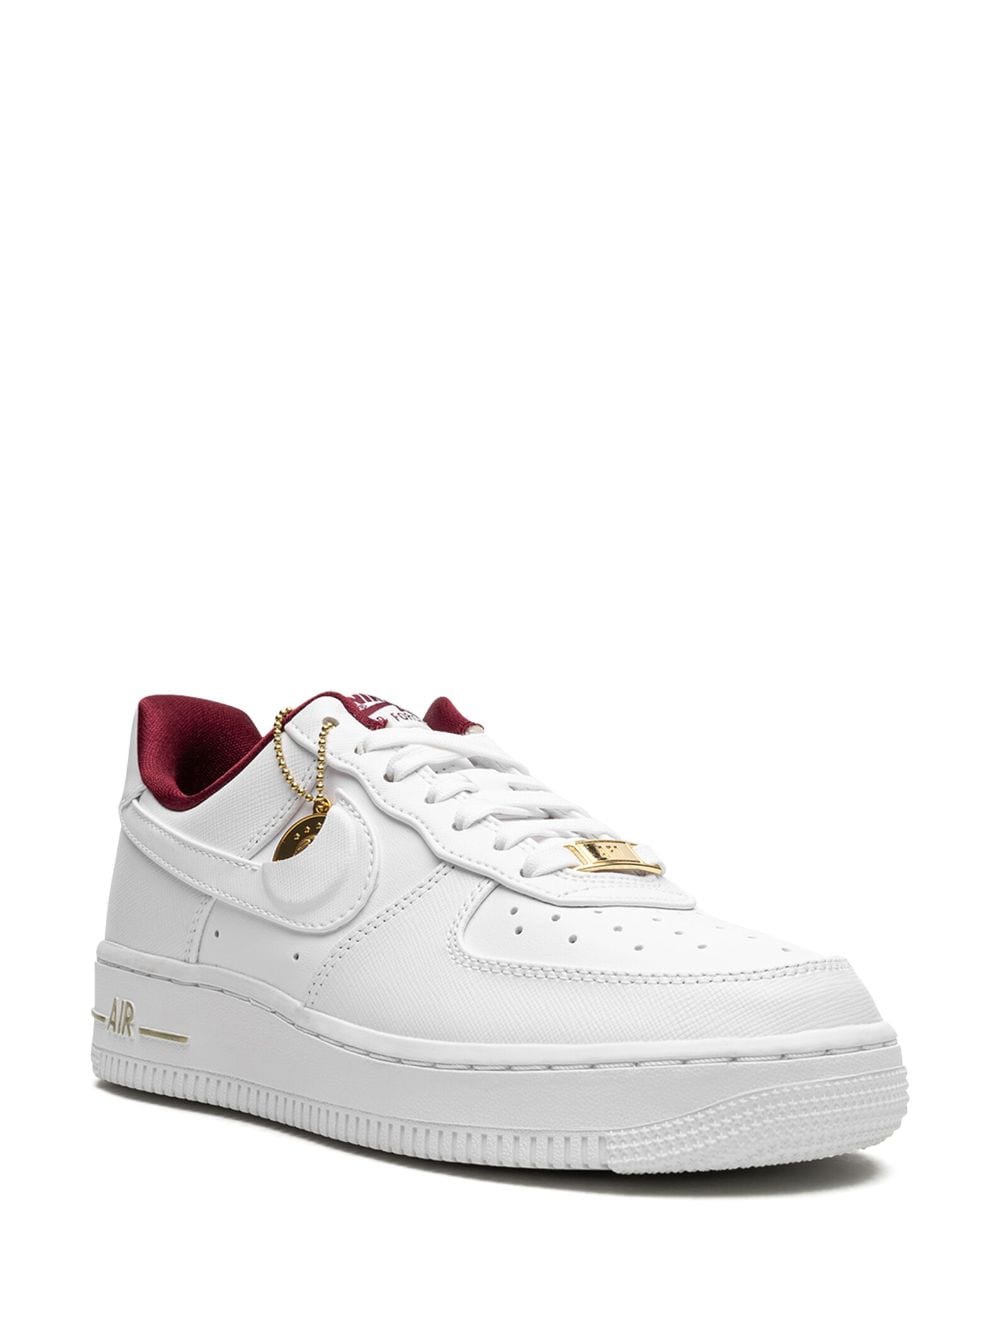 LOUIS VUITTON NIKE AIR FORCE 1 LOW GOLD - The Edit LDN